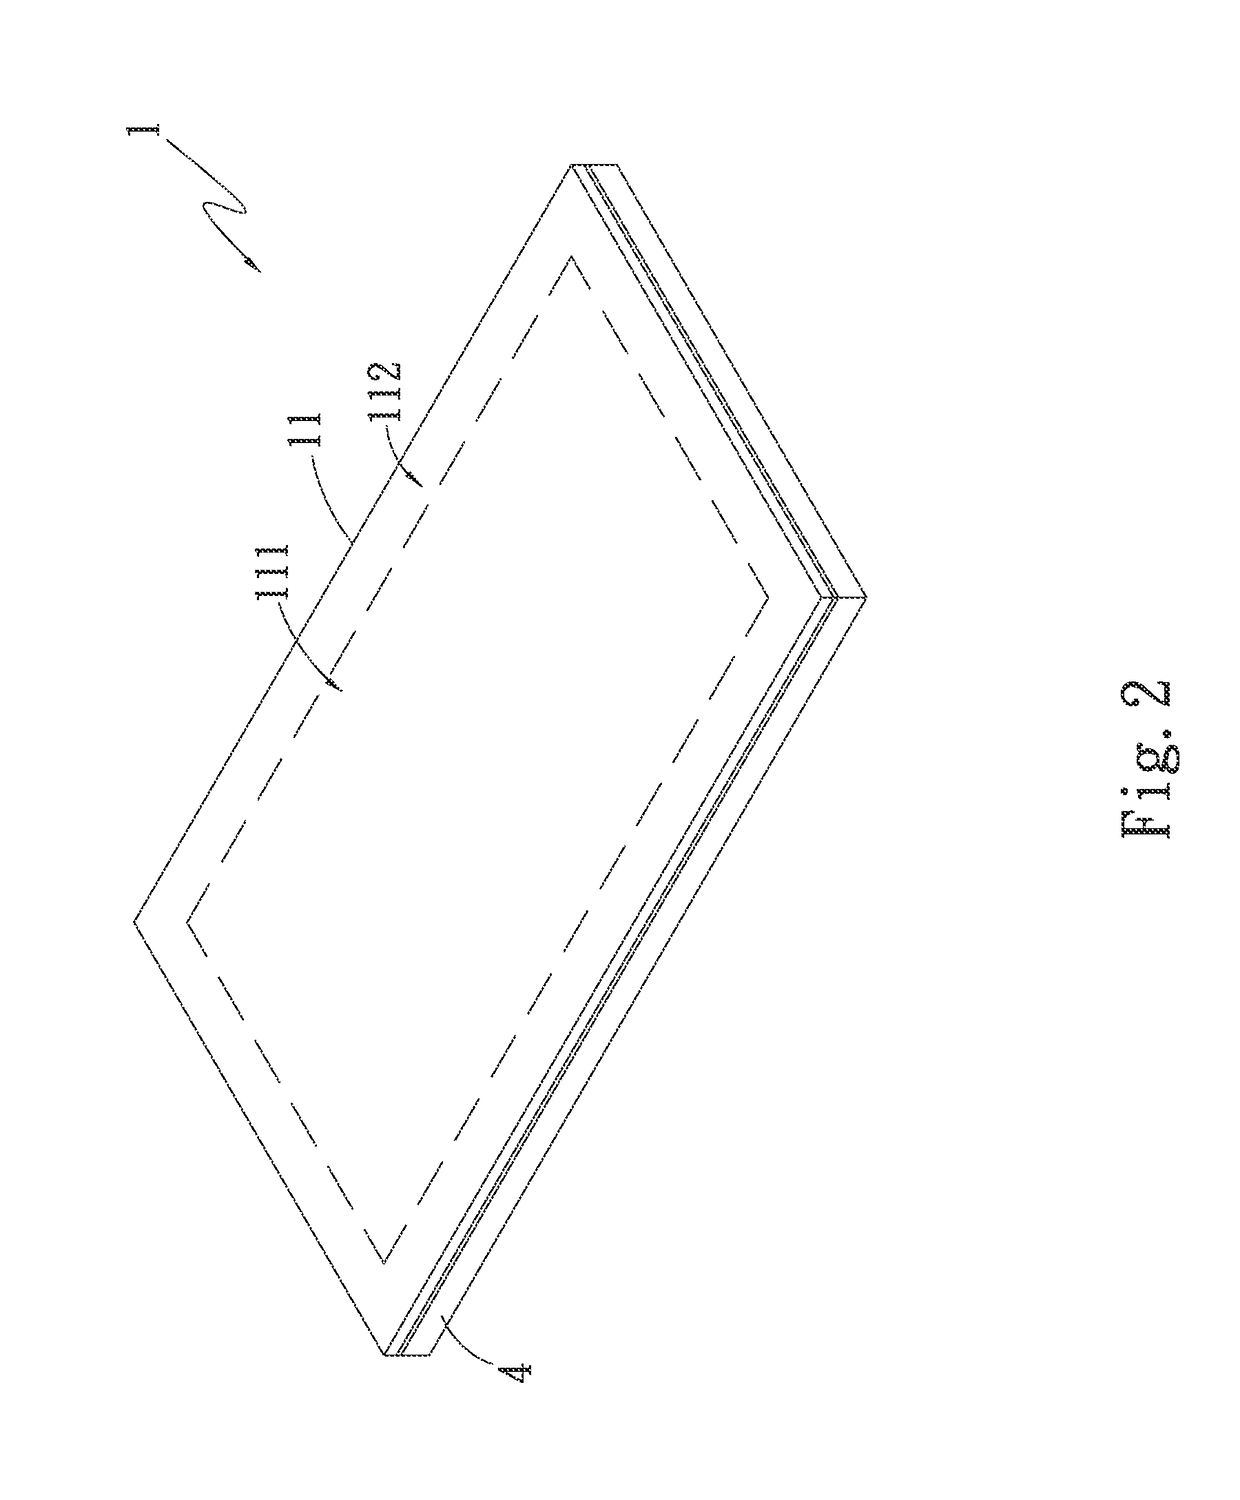 Touch display device with pressure sensor